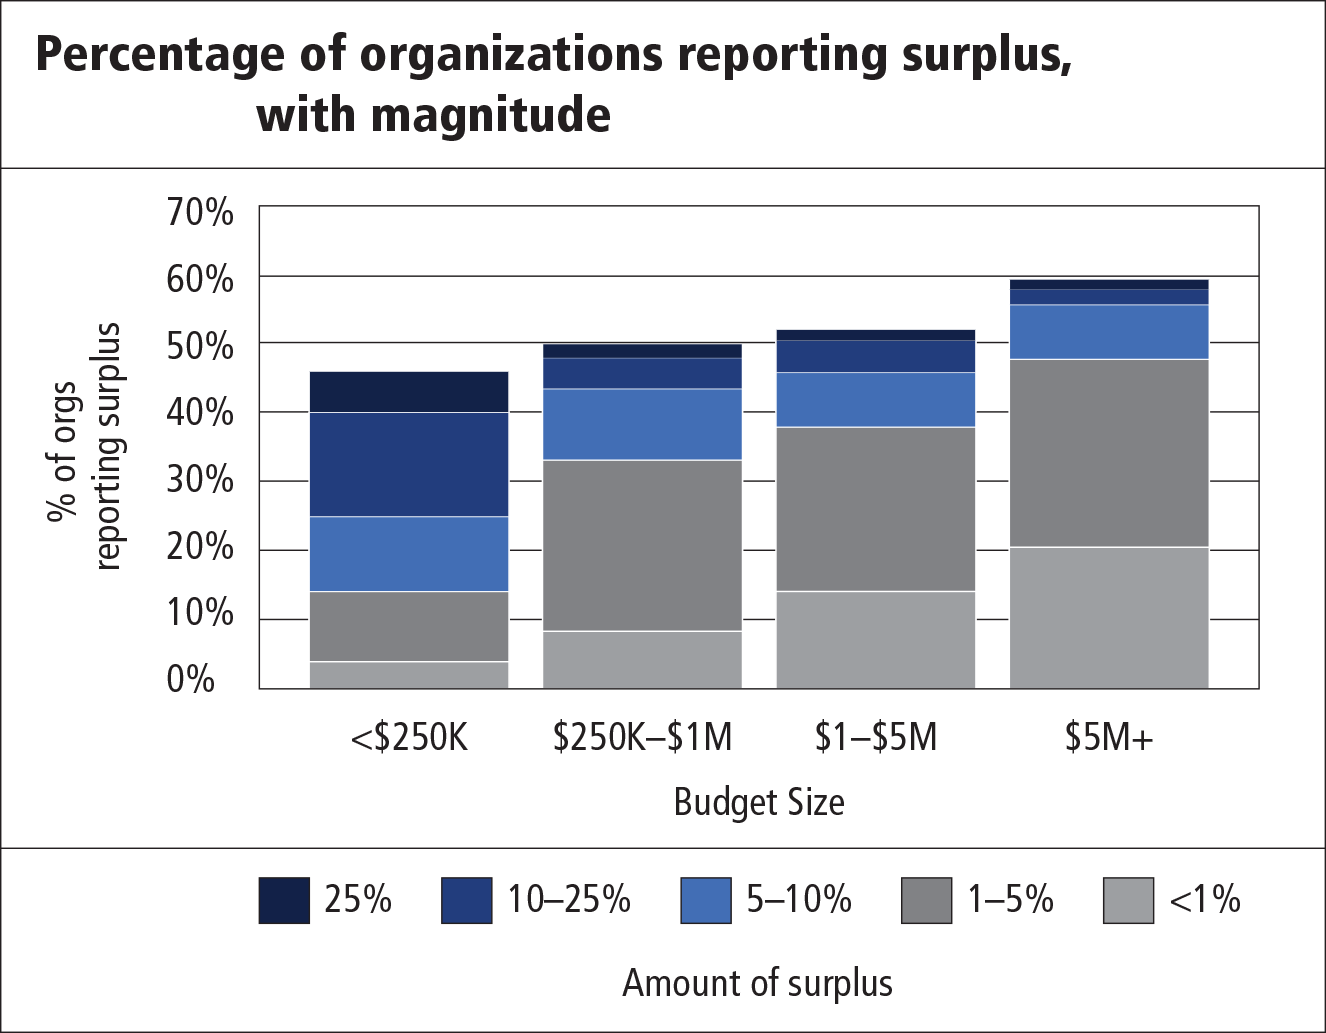 FIGURE 1. Percentage of organizations reporting surplus, with magnitude.